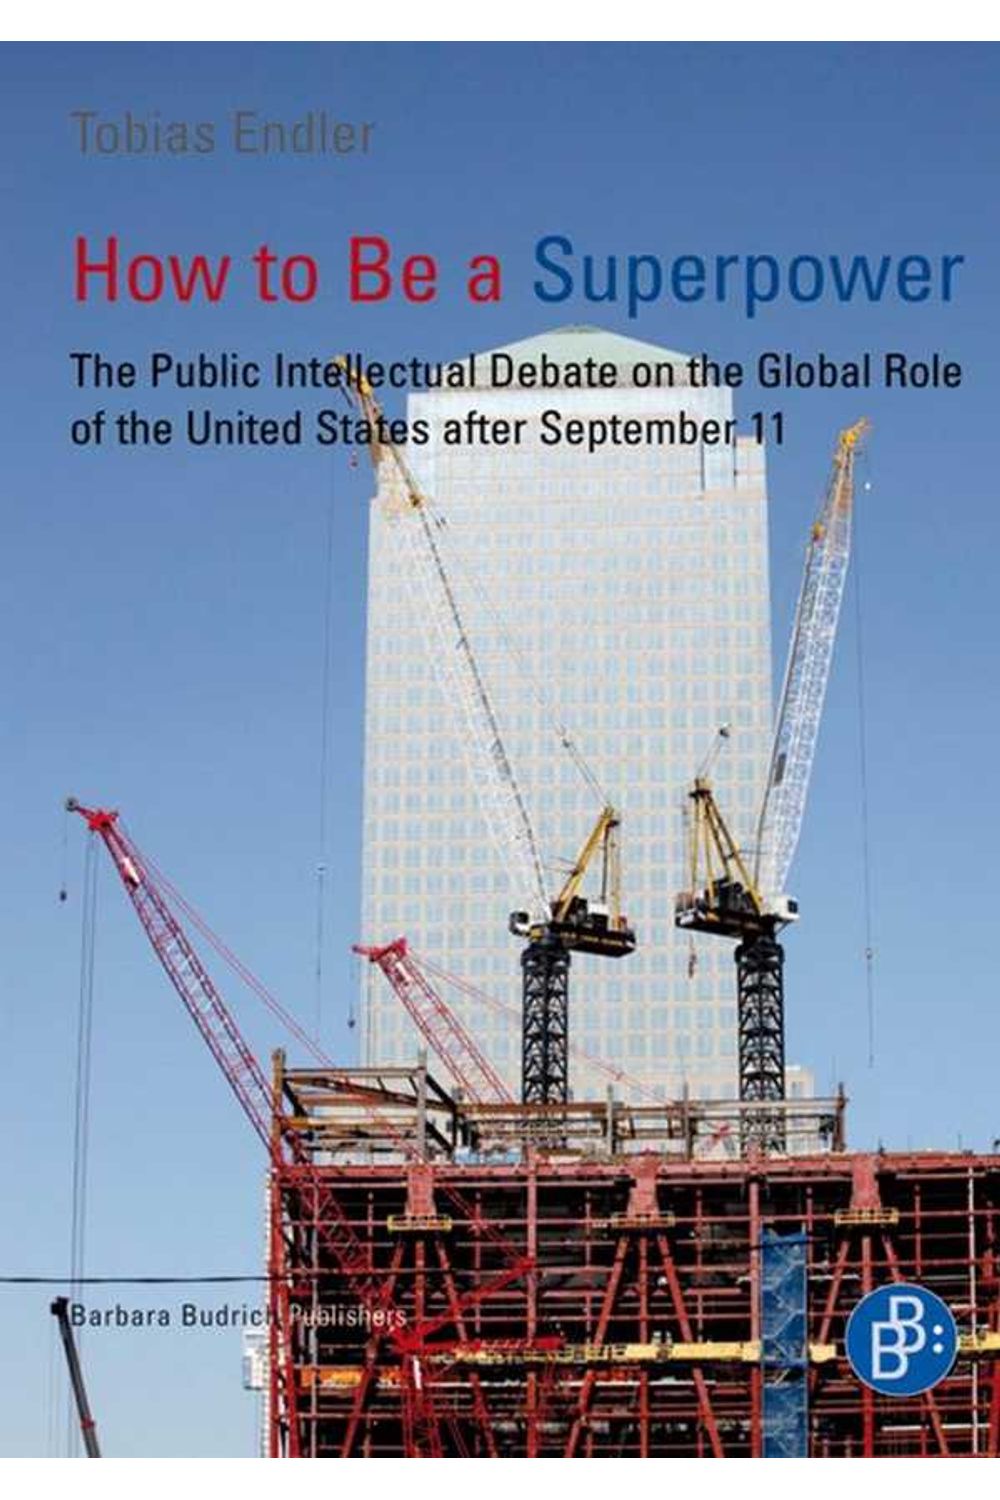 bw-how-to-be-a-superpower-verlag-barbara-budrich-9783866495296